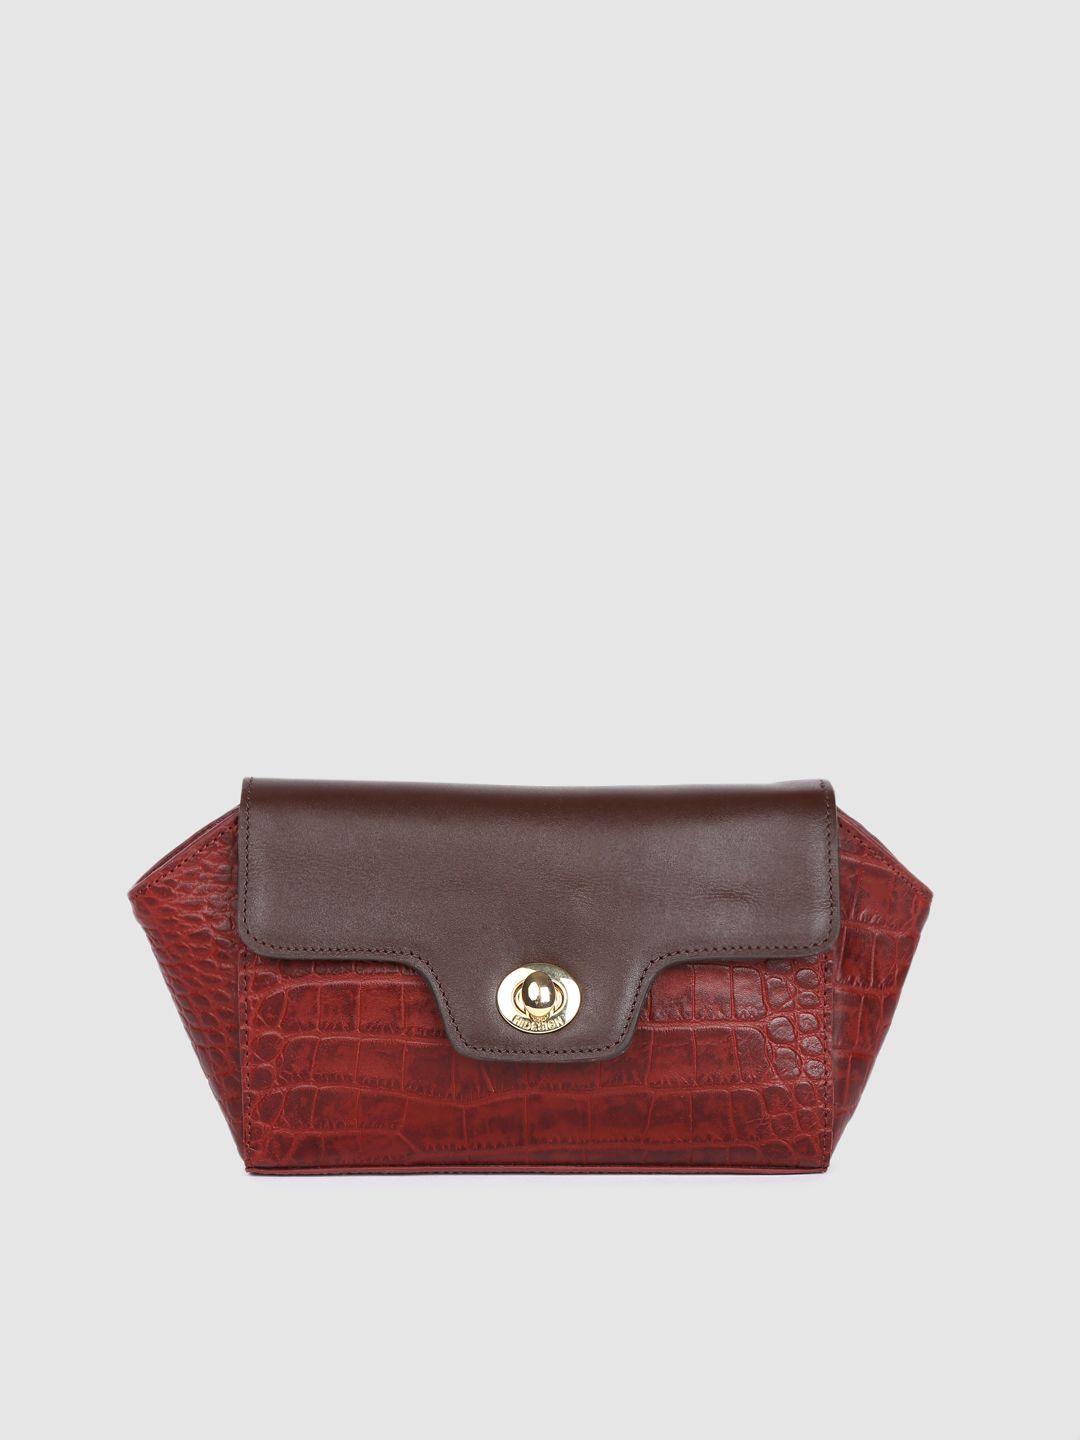 hidesign maroon & brown textured leather clutch